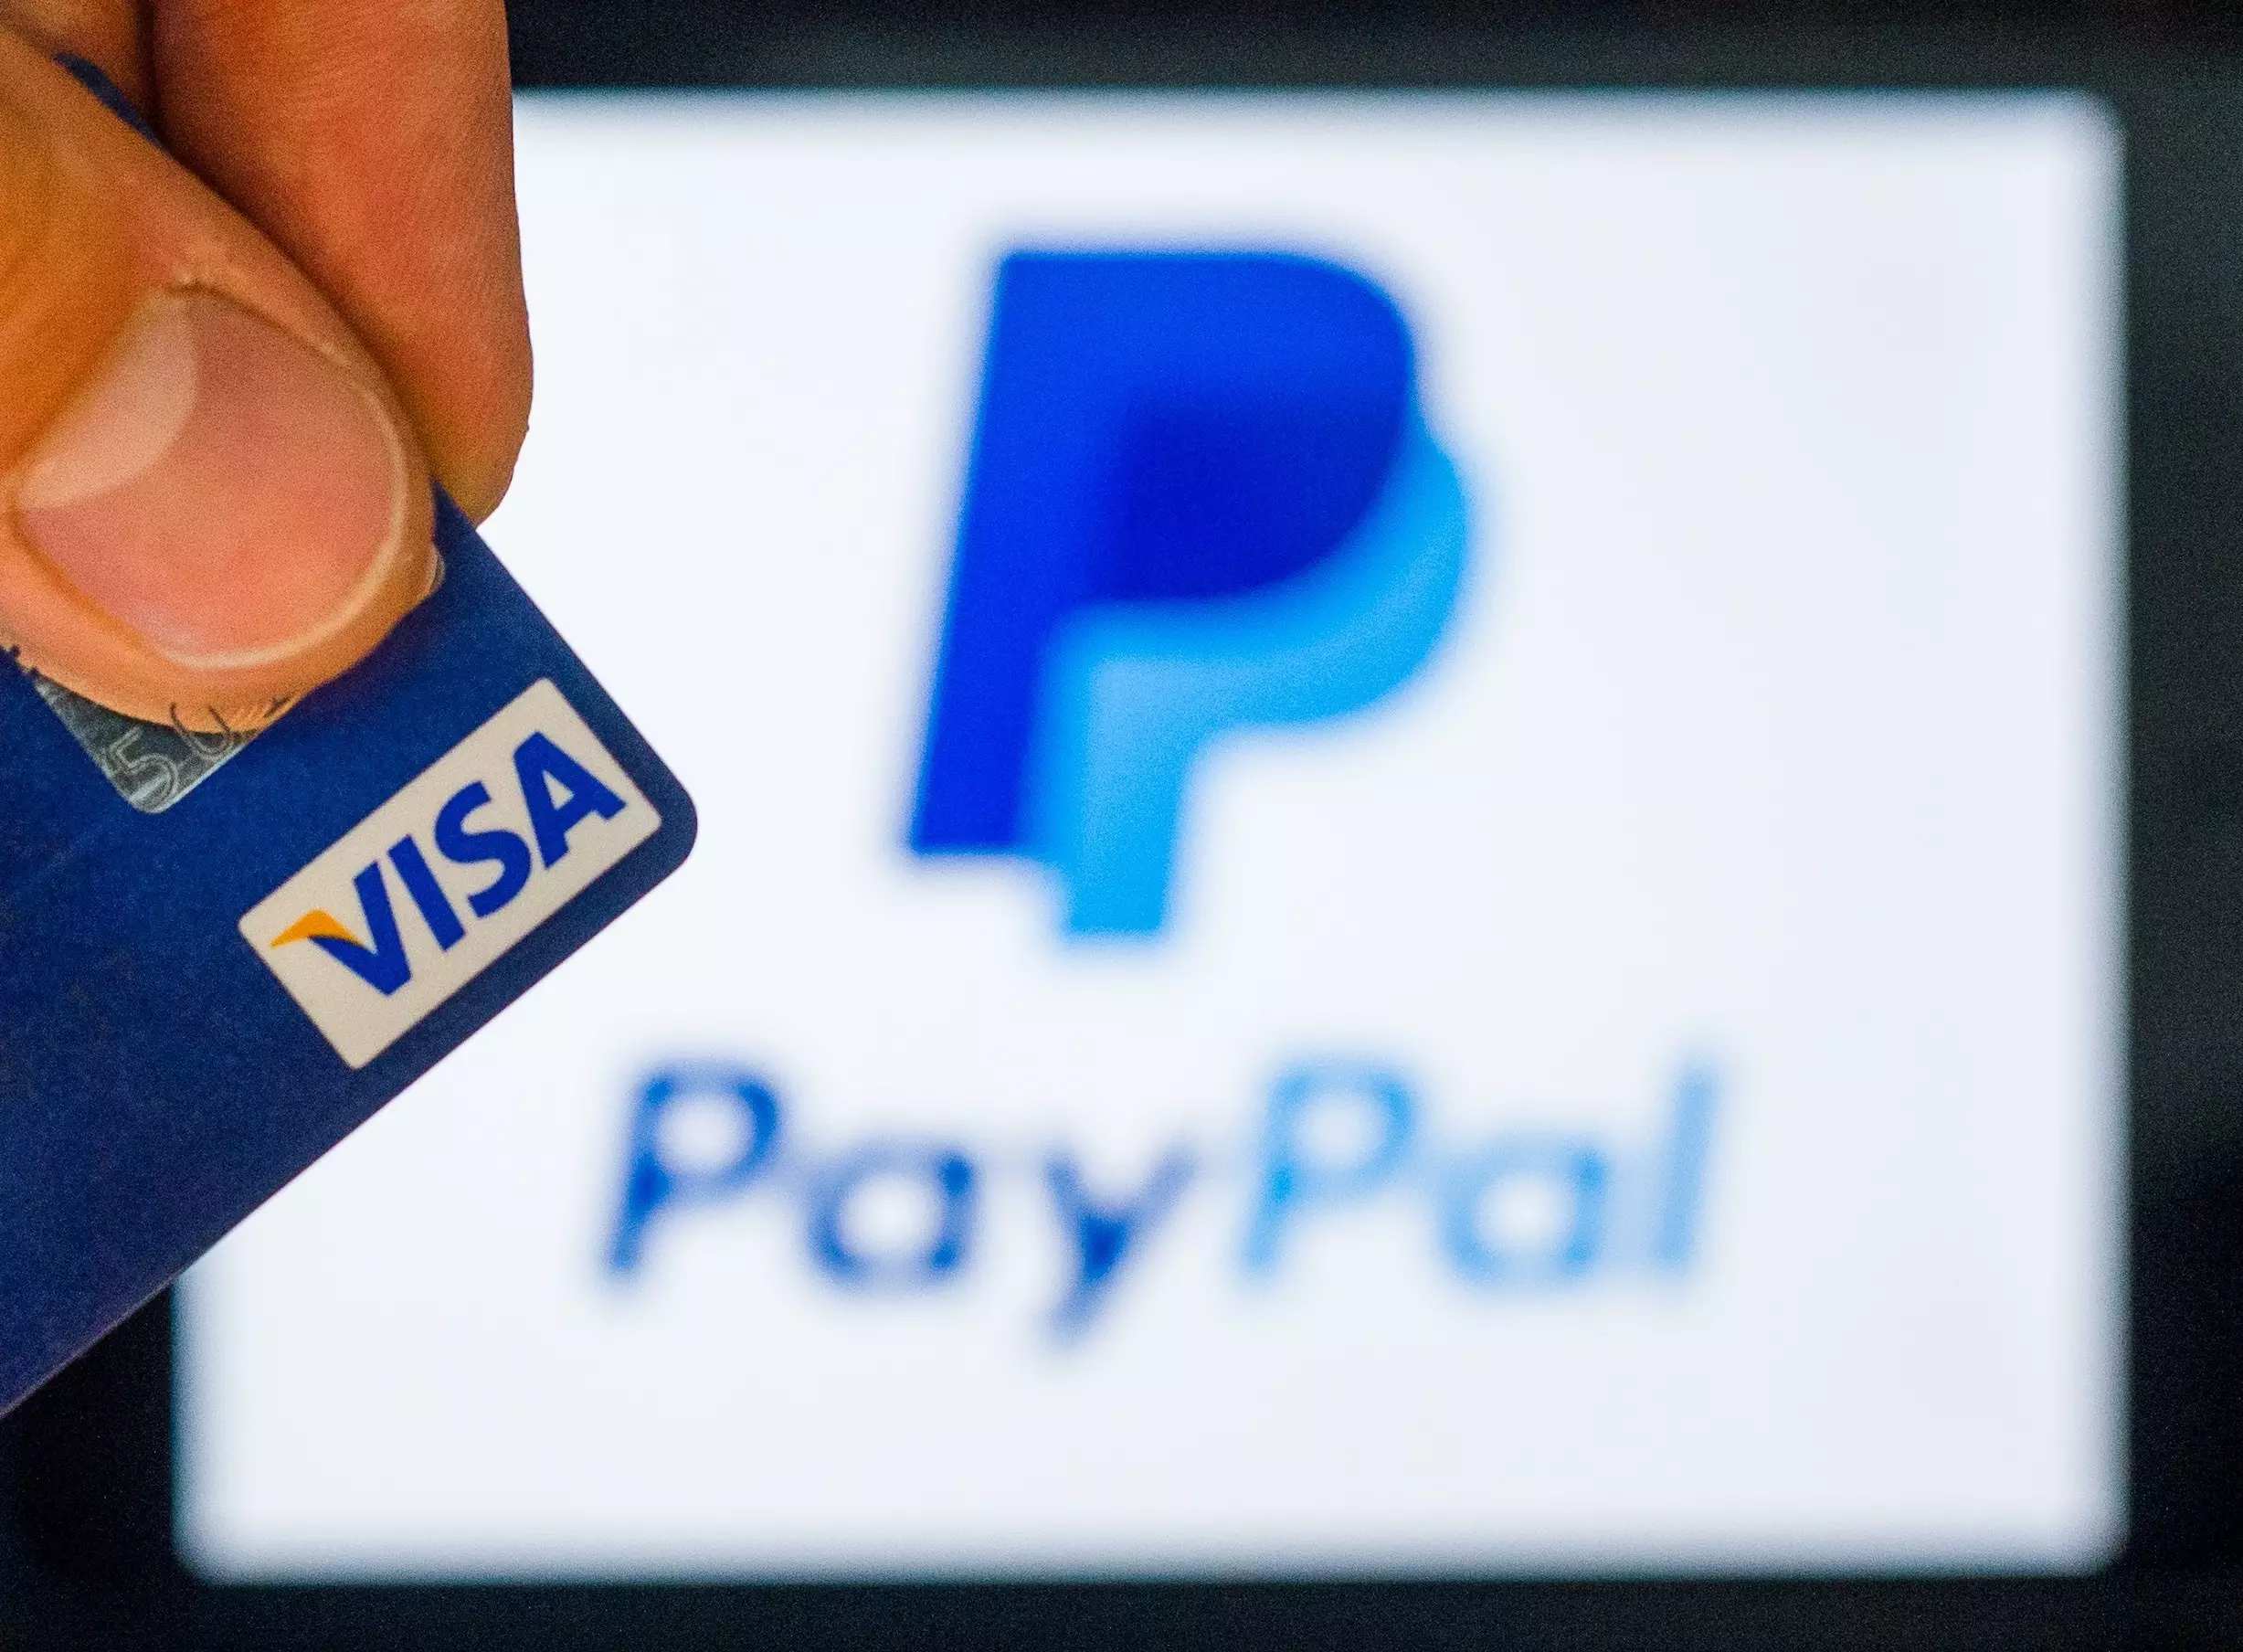 Log onto your PayPal account to avoid charges (